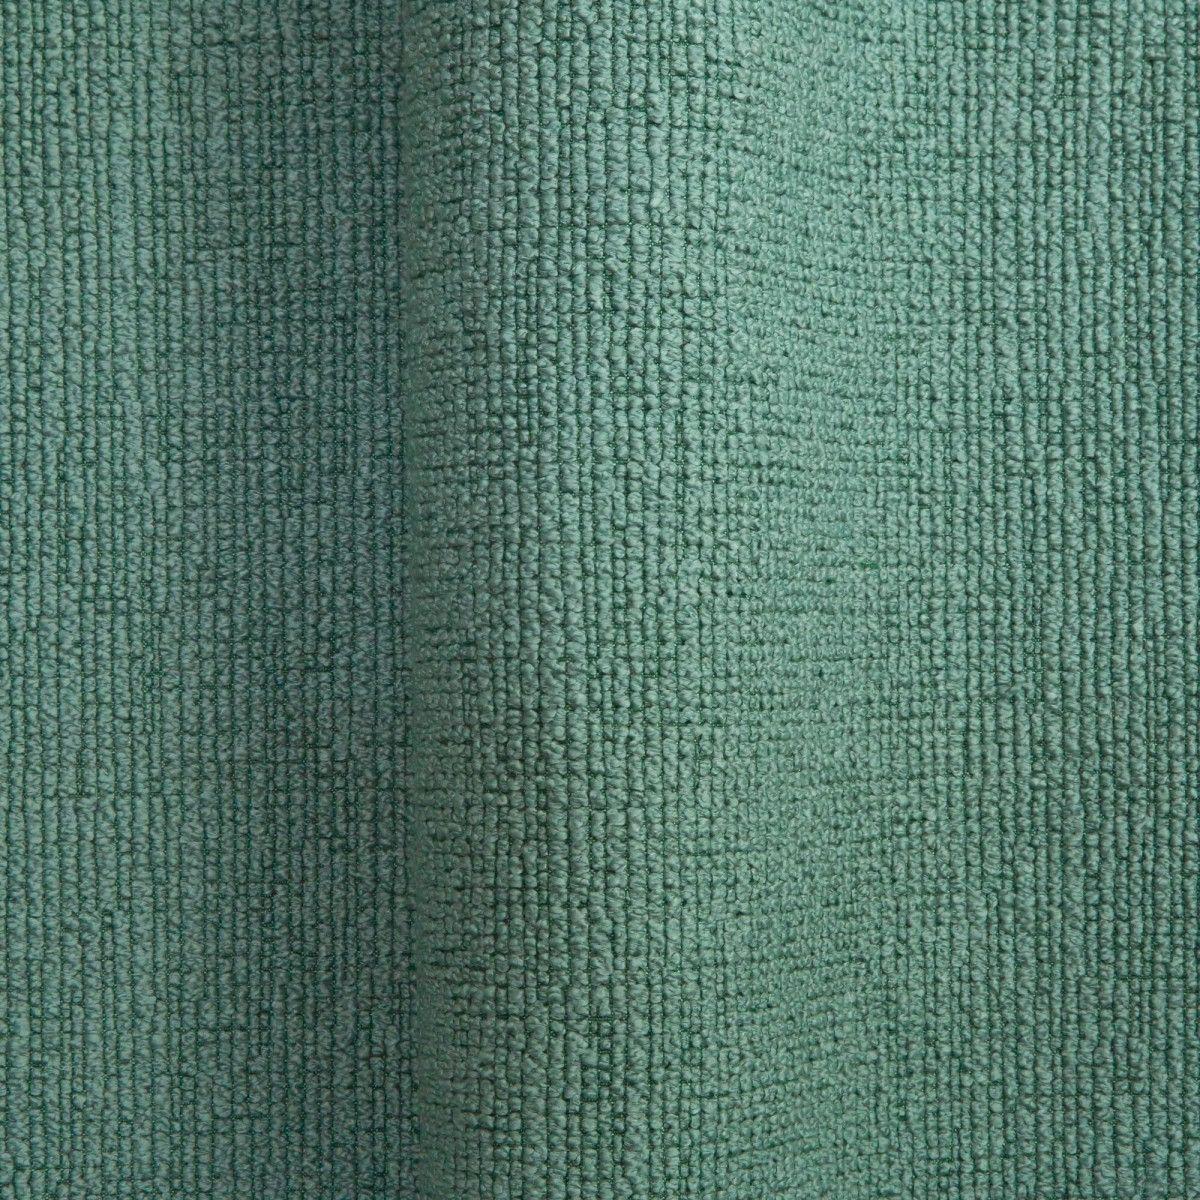 Popus Editions Giovanna 4 Seater Sofa in Mint Megeve Fabric with a Knit Effect

Giovanna is a sofa with a strong profile. A sober, plush line, with this famous detail that changes everything, so as not to forget its strength of character and this